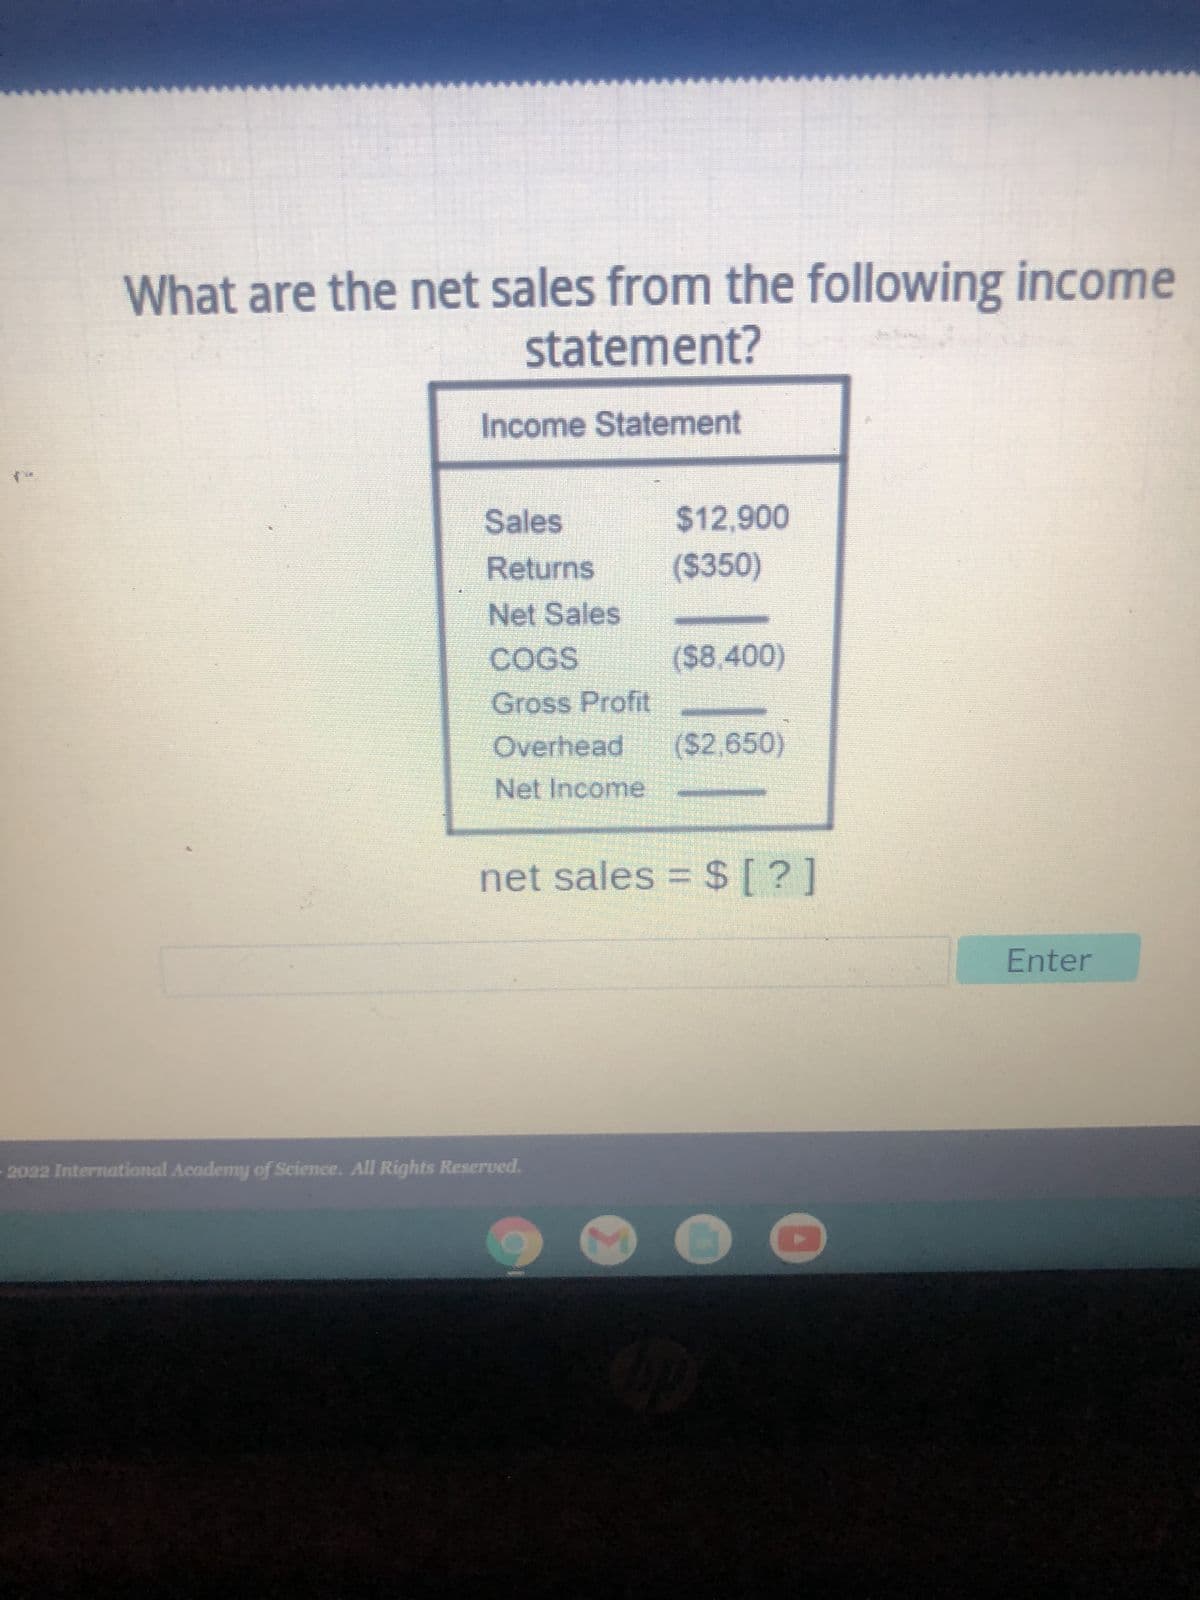 What are the net sales from the following income
statement?
Income Statement
Sales
$12,900
Returns
($350)
Net Sales
COGS
($8,400)
Gross Profit
Overhead ($2,650)
Net Income
net sales = $ [?]
2022 International Academy of Science. All Rights Reserved.
S
Enter